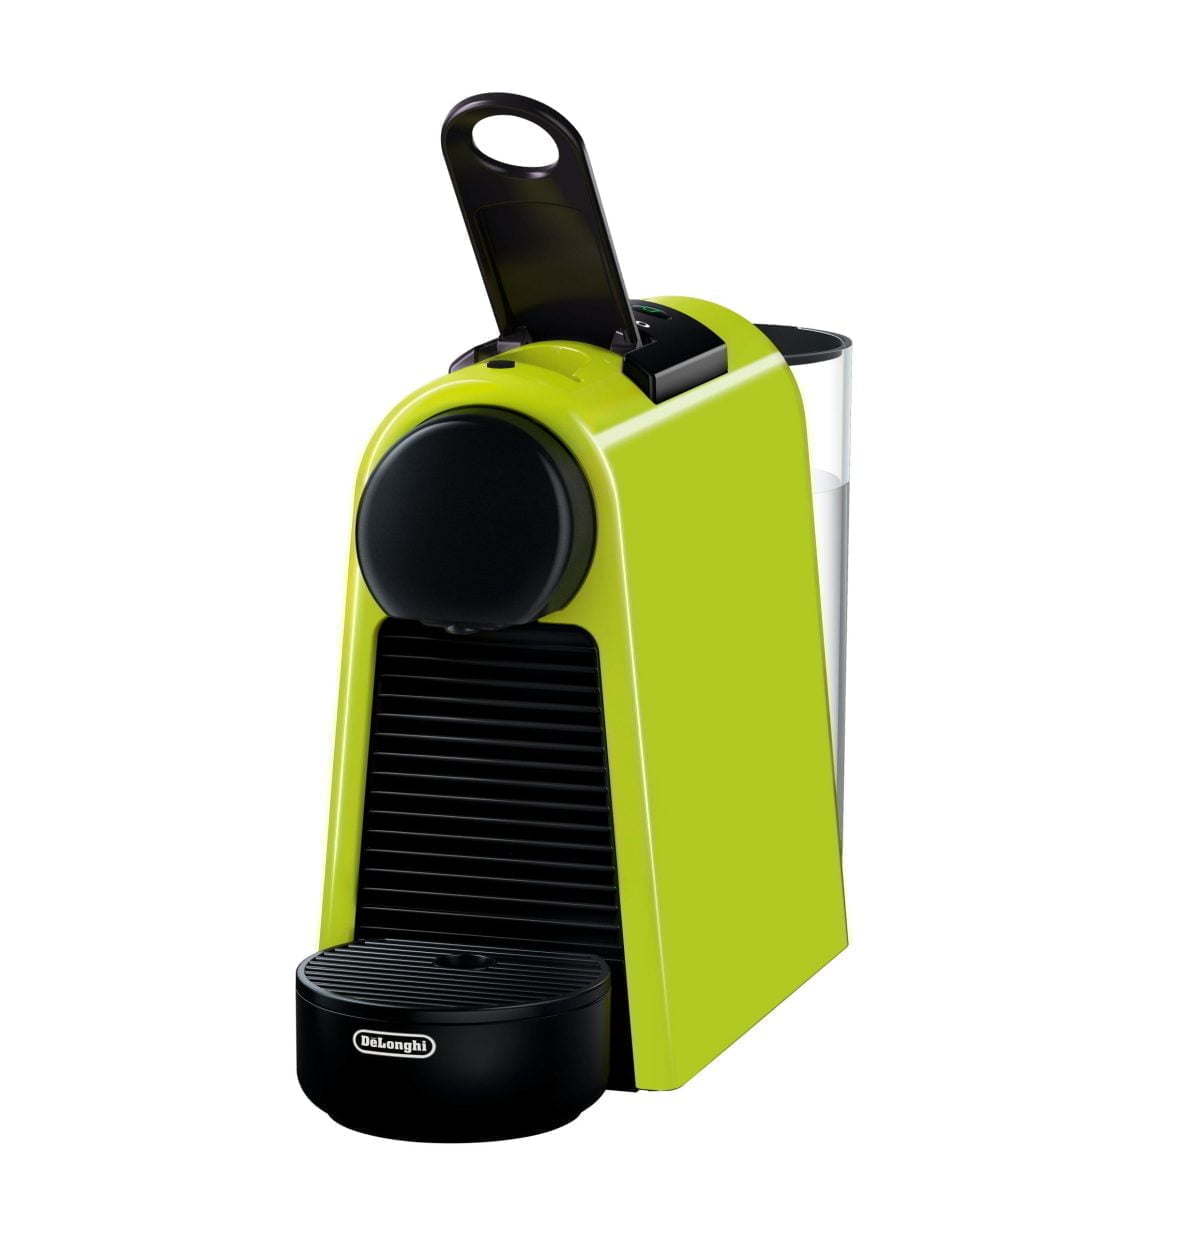 5934816Cv11D Scaled Nespresso &Lt;Div Class=&Quot;Sku-Title&Quot;&Gt; &Lt;H1&Gt;Nespresso Essenza Mini Espresso Machine By De'Longhi, Lime Green - En85.L (14 Capsules Included)&Lt;/H1&Gt; &Lt;/Div&Gt; Compact Without Compromise By Concentrating Its Coffee Knowhow And Expertise Into A Brand New Design. Nespresso Has Delivered Its Most Compact Machine Yet - Without Any Compromise On Taste. The New Essenza Mini Combines Ease-Of-Use, Minimalist Beauty And Unrivalled Quality To Create The Perfect Cup Every Time. It'S The Small Machine That Opens Up The Whole World Of Nespresso Coffee. &Lt;H4&Gt;Warranty : 1 Year (Shipping Not Included)&Lt;/H4&Gt; Nespresso Essenza Mini Nespresso Essenza Mini Espresso Machine By De'Longhi, Lime Green - En85.L (14 Capsules Included)